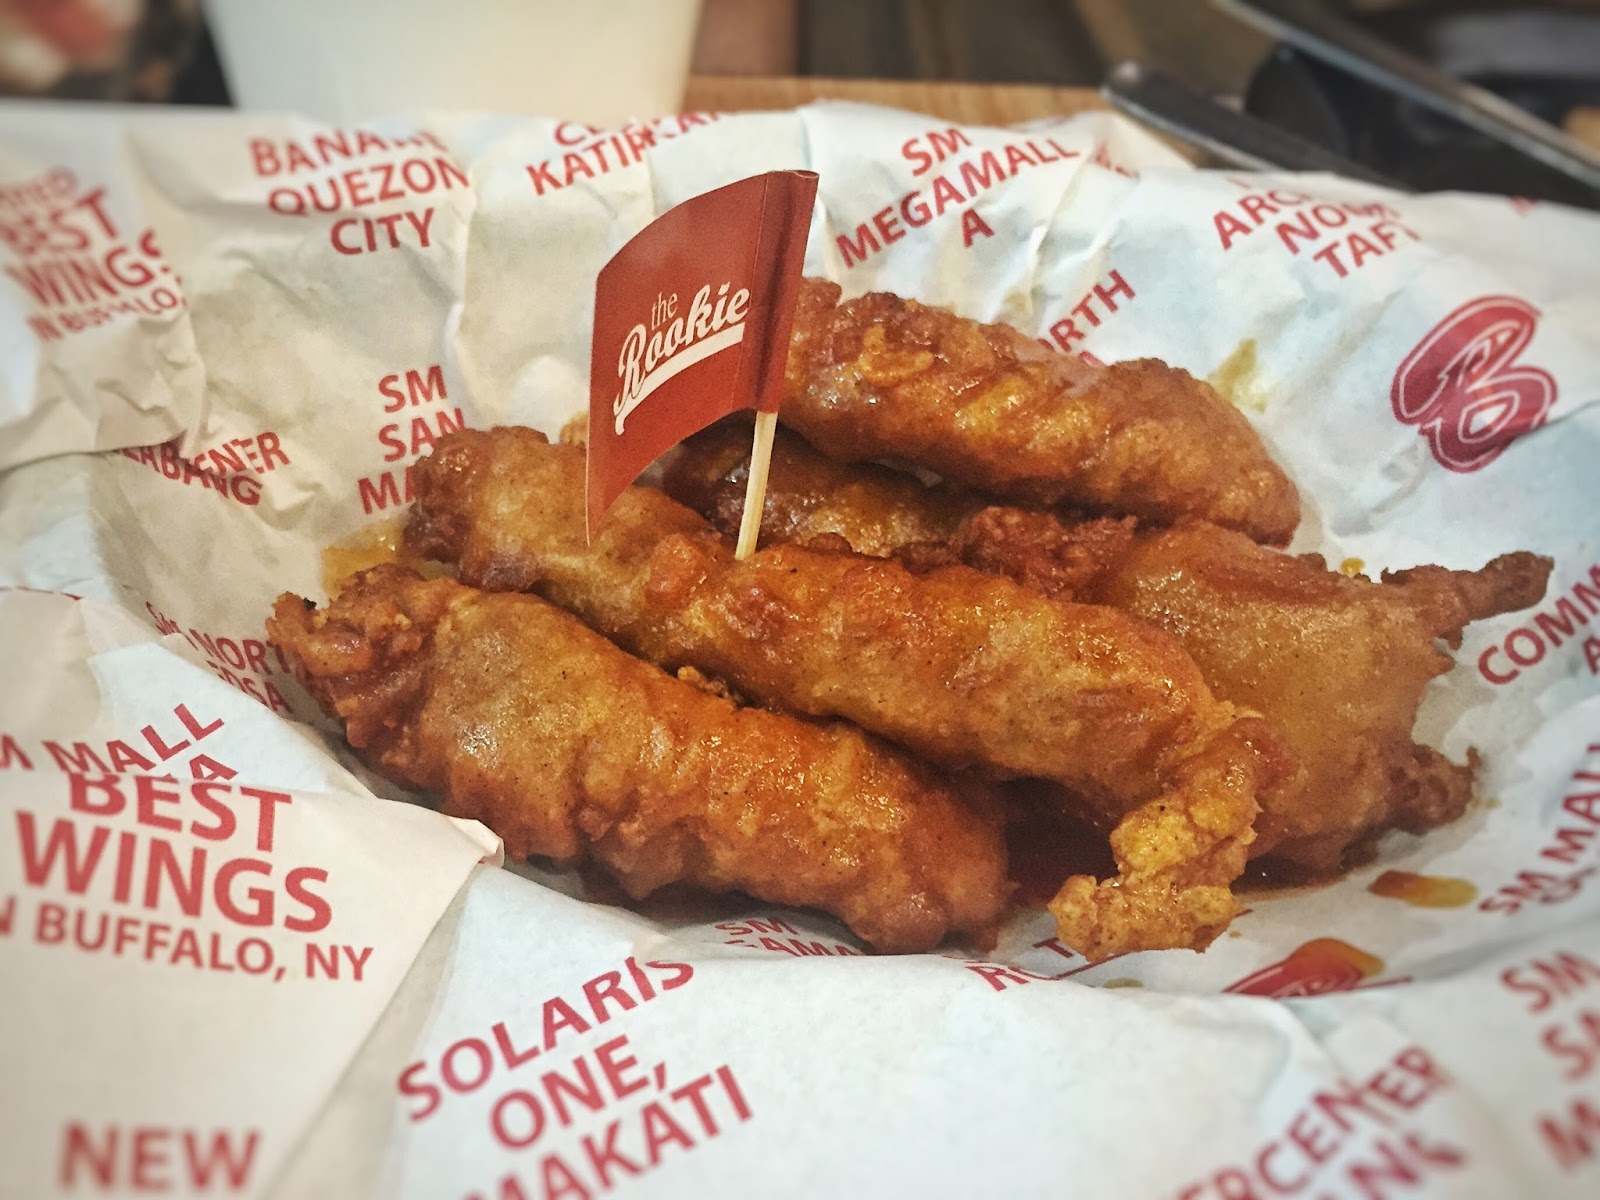 THE HOTTEST BUFFALO WINGS AT BUFFALO'S WINGS N' THINGS SM SAN PABLO - Blushing Sneakerhead – by Christhel